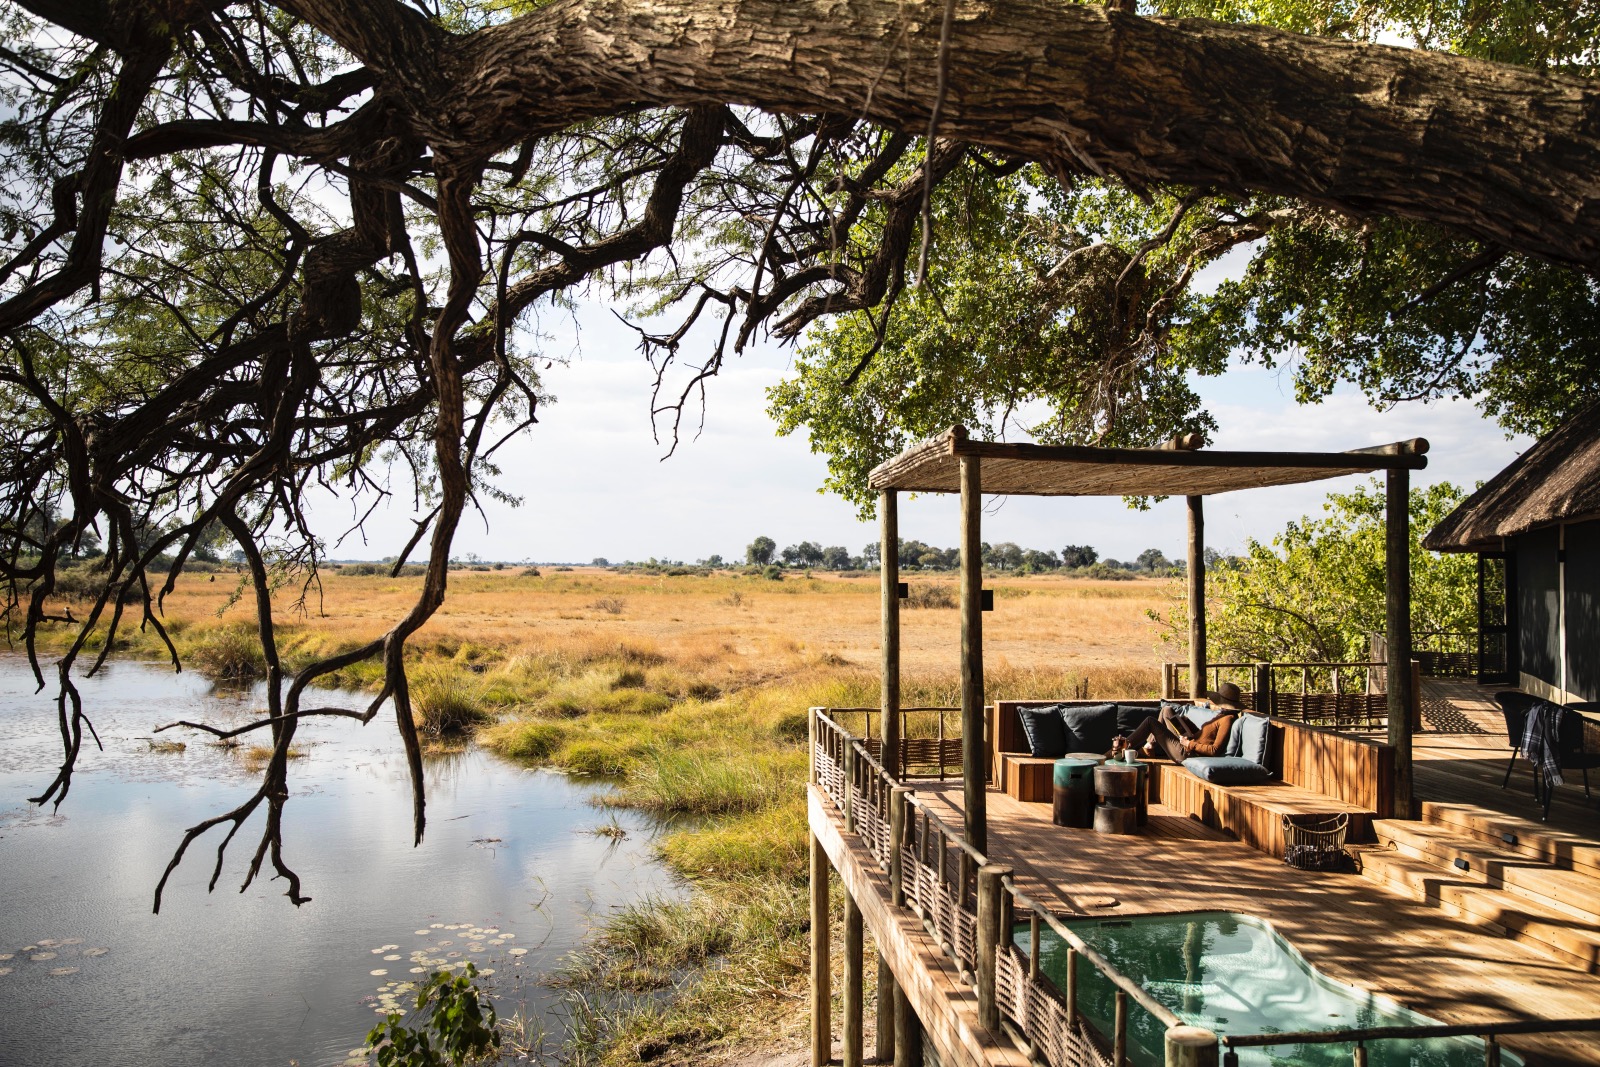 Relaxing on the viewing deck overlooking the Linyanti Marsh in Botswana